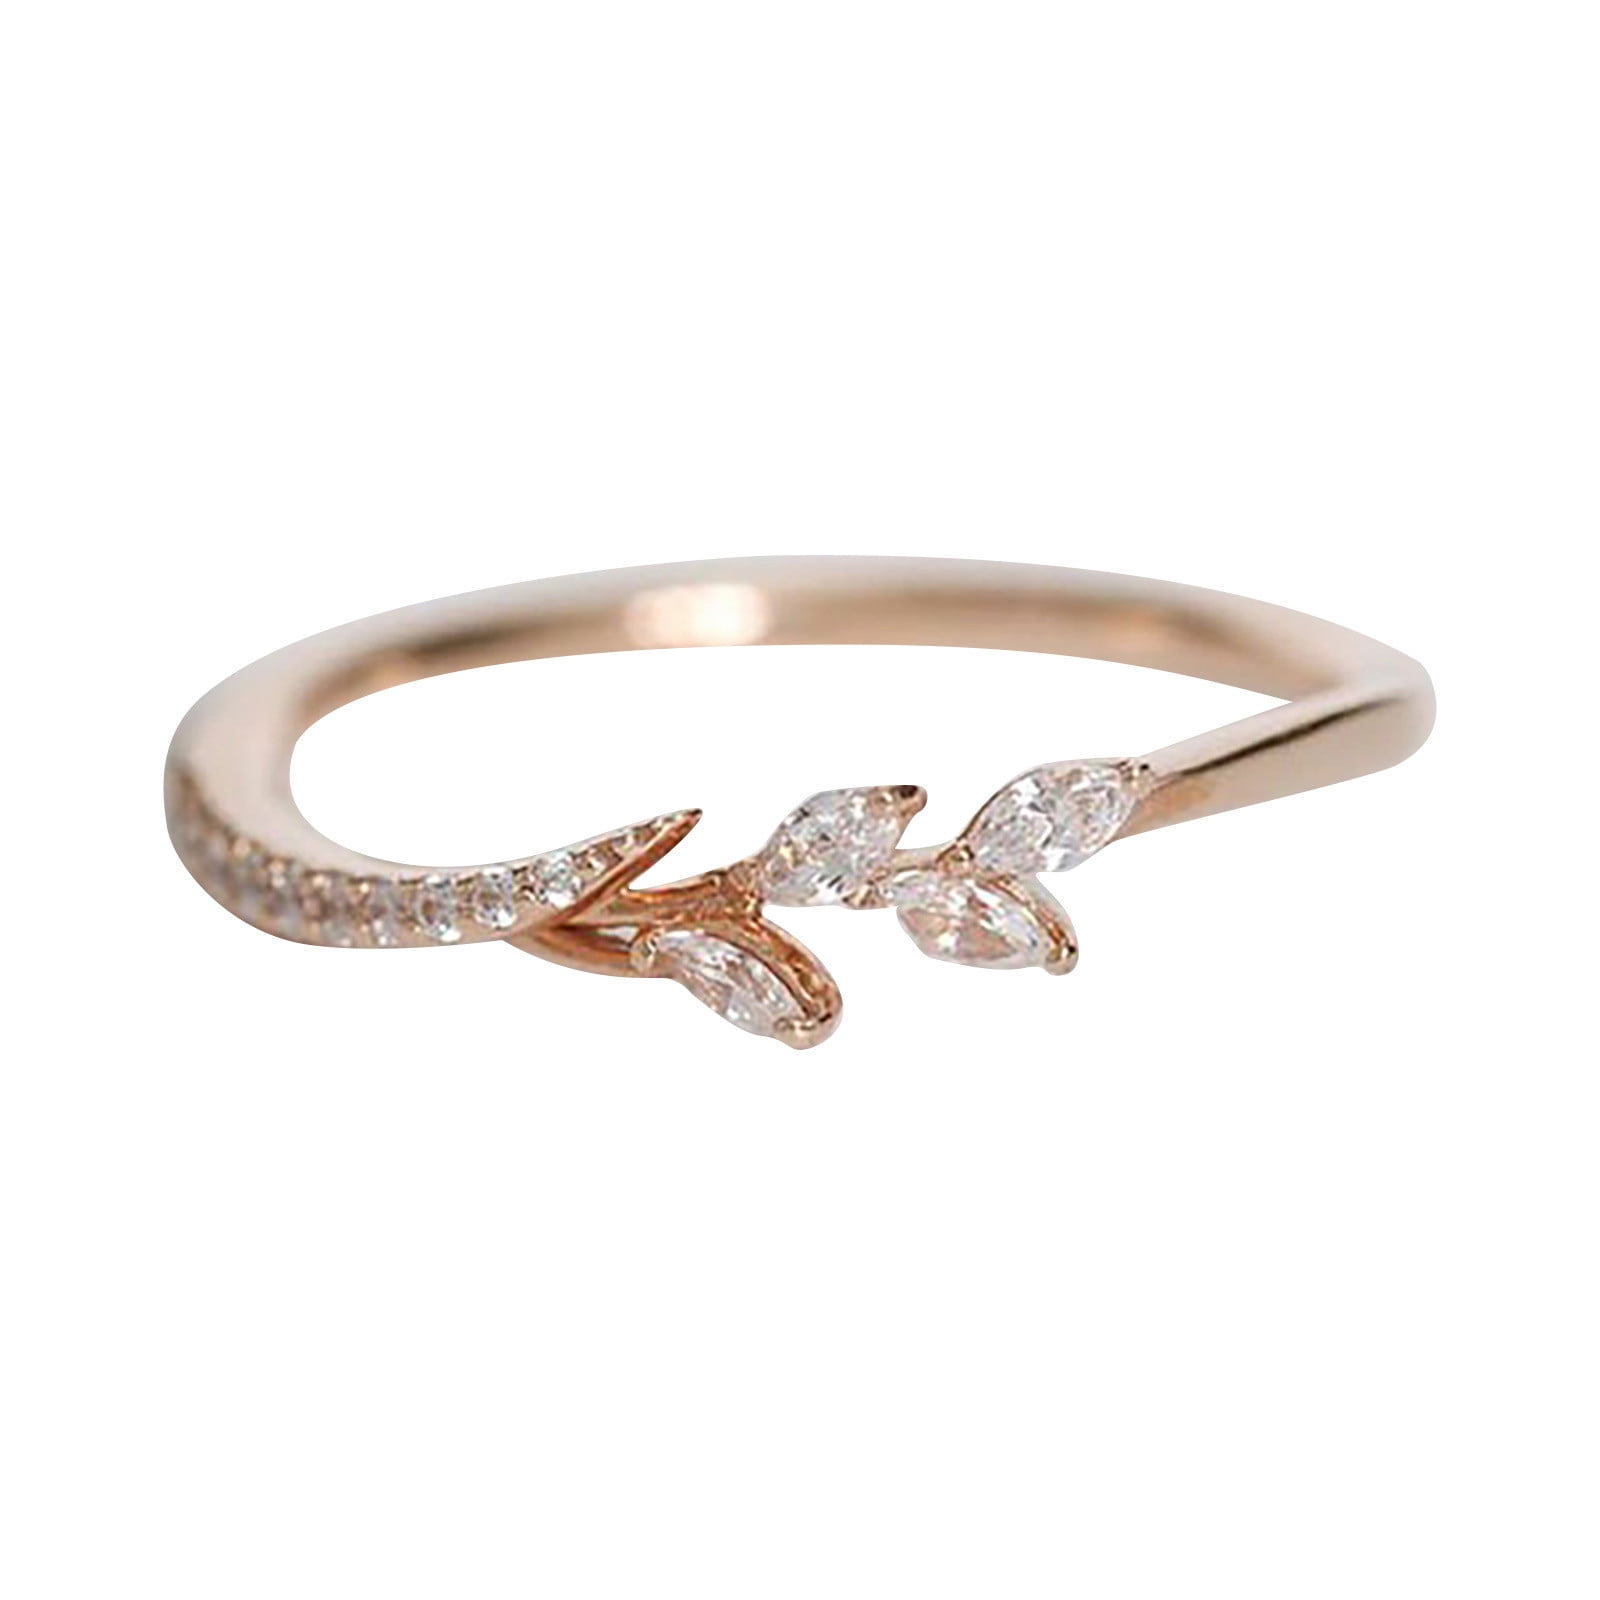 Clearance Deals Rings for Women 18k Rose Gold Eternity Wedding Band ...